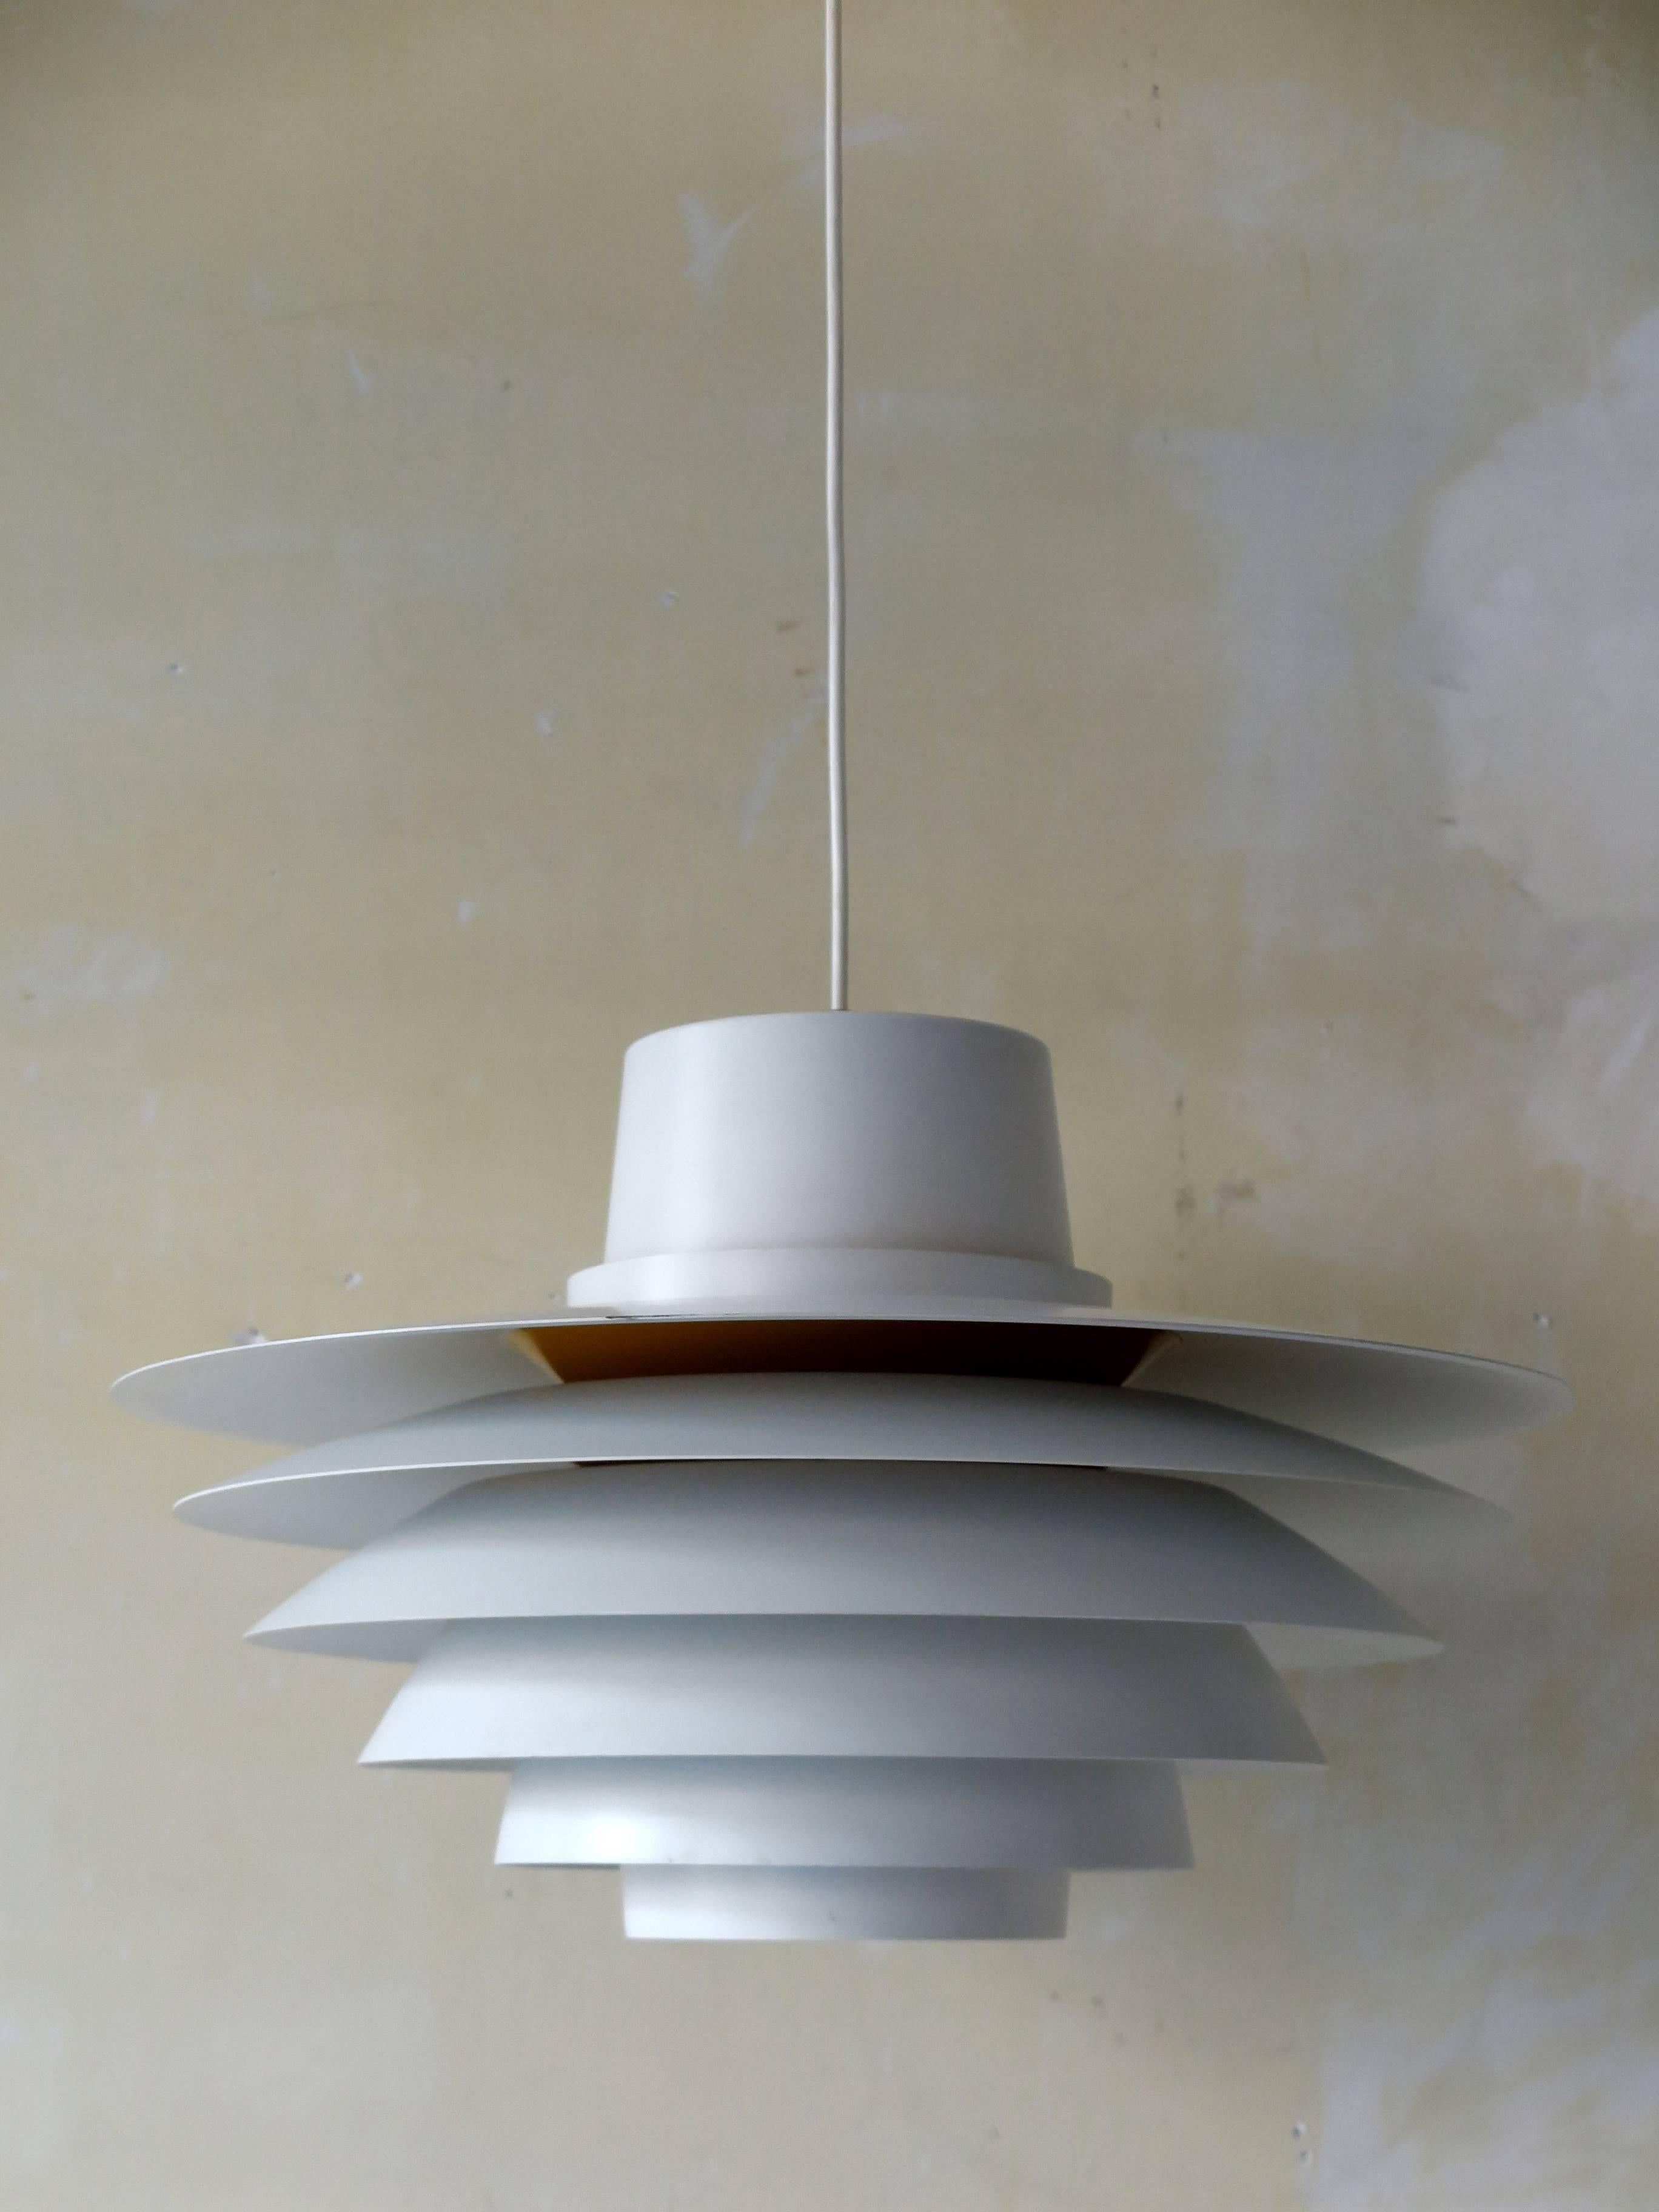 Scandinavian Mid-Century Modern Danish pendant lamp model “Verona” designed by Svend Middelboe and produced by Nordisk Solar, white lacquered metal, orange centre, circa 1960s.